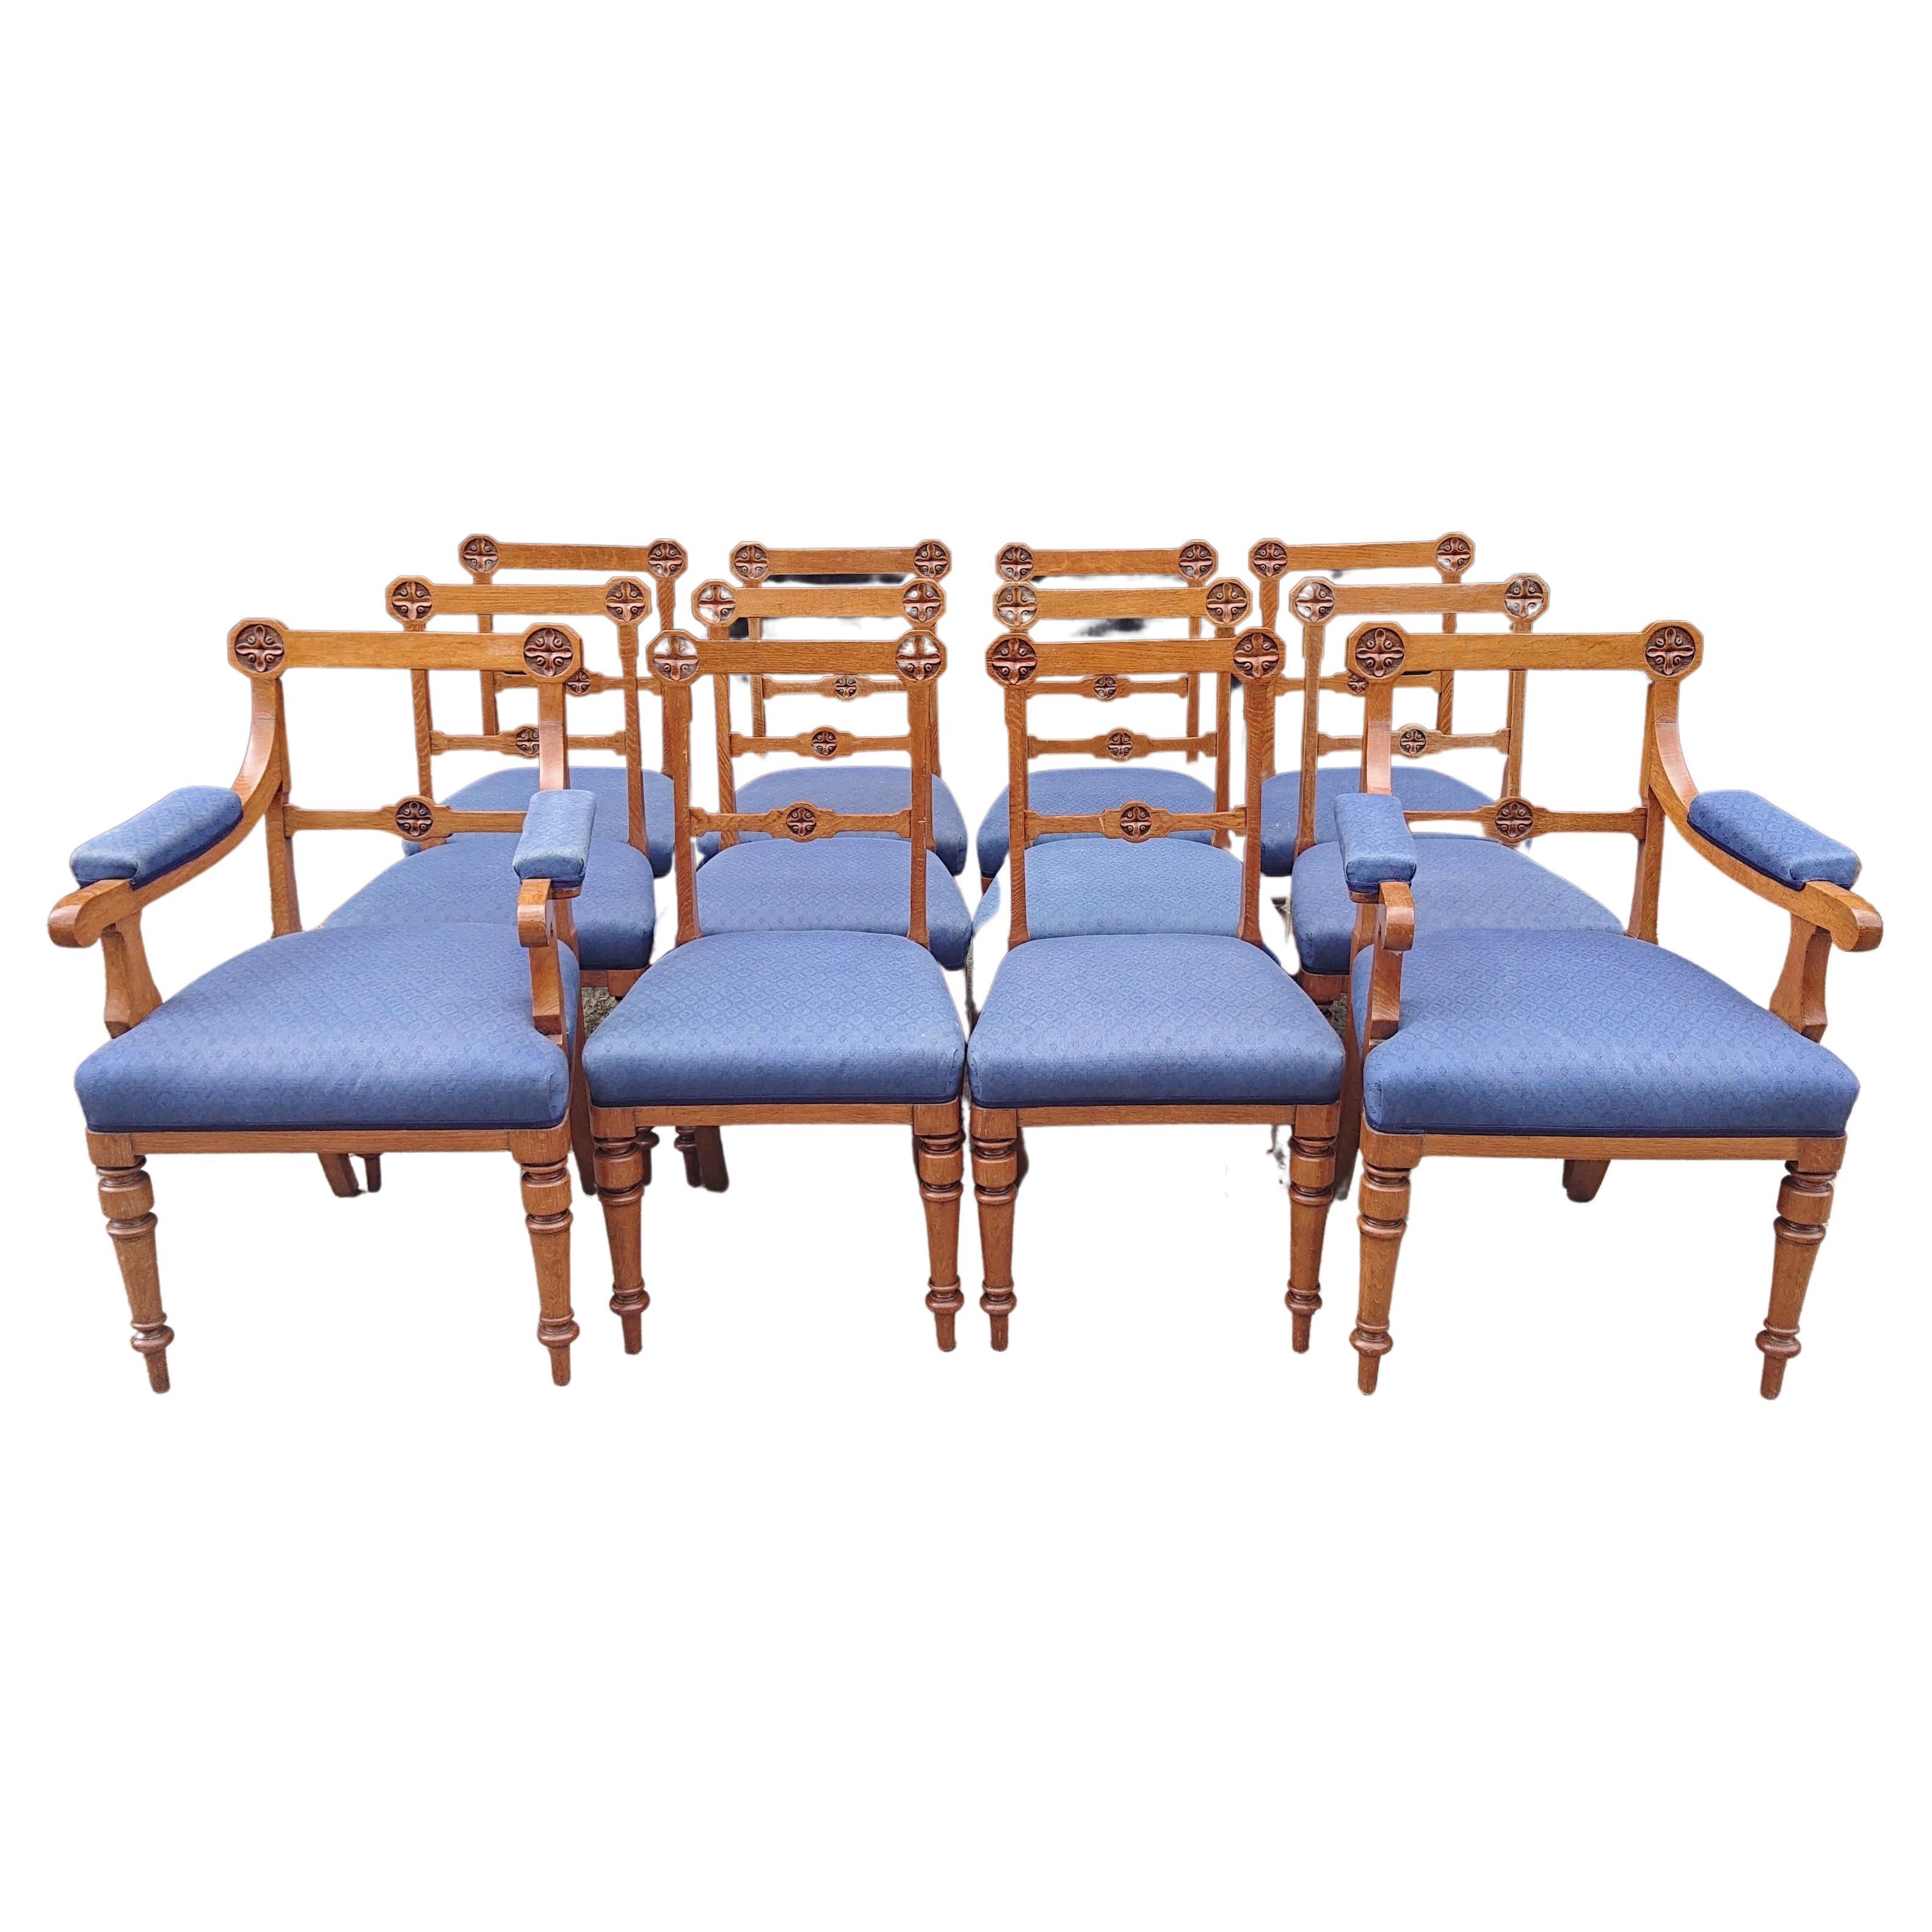 Set of Twelve Antique Dining Chairs by Lamb of Manchester For Sale